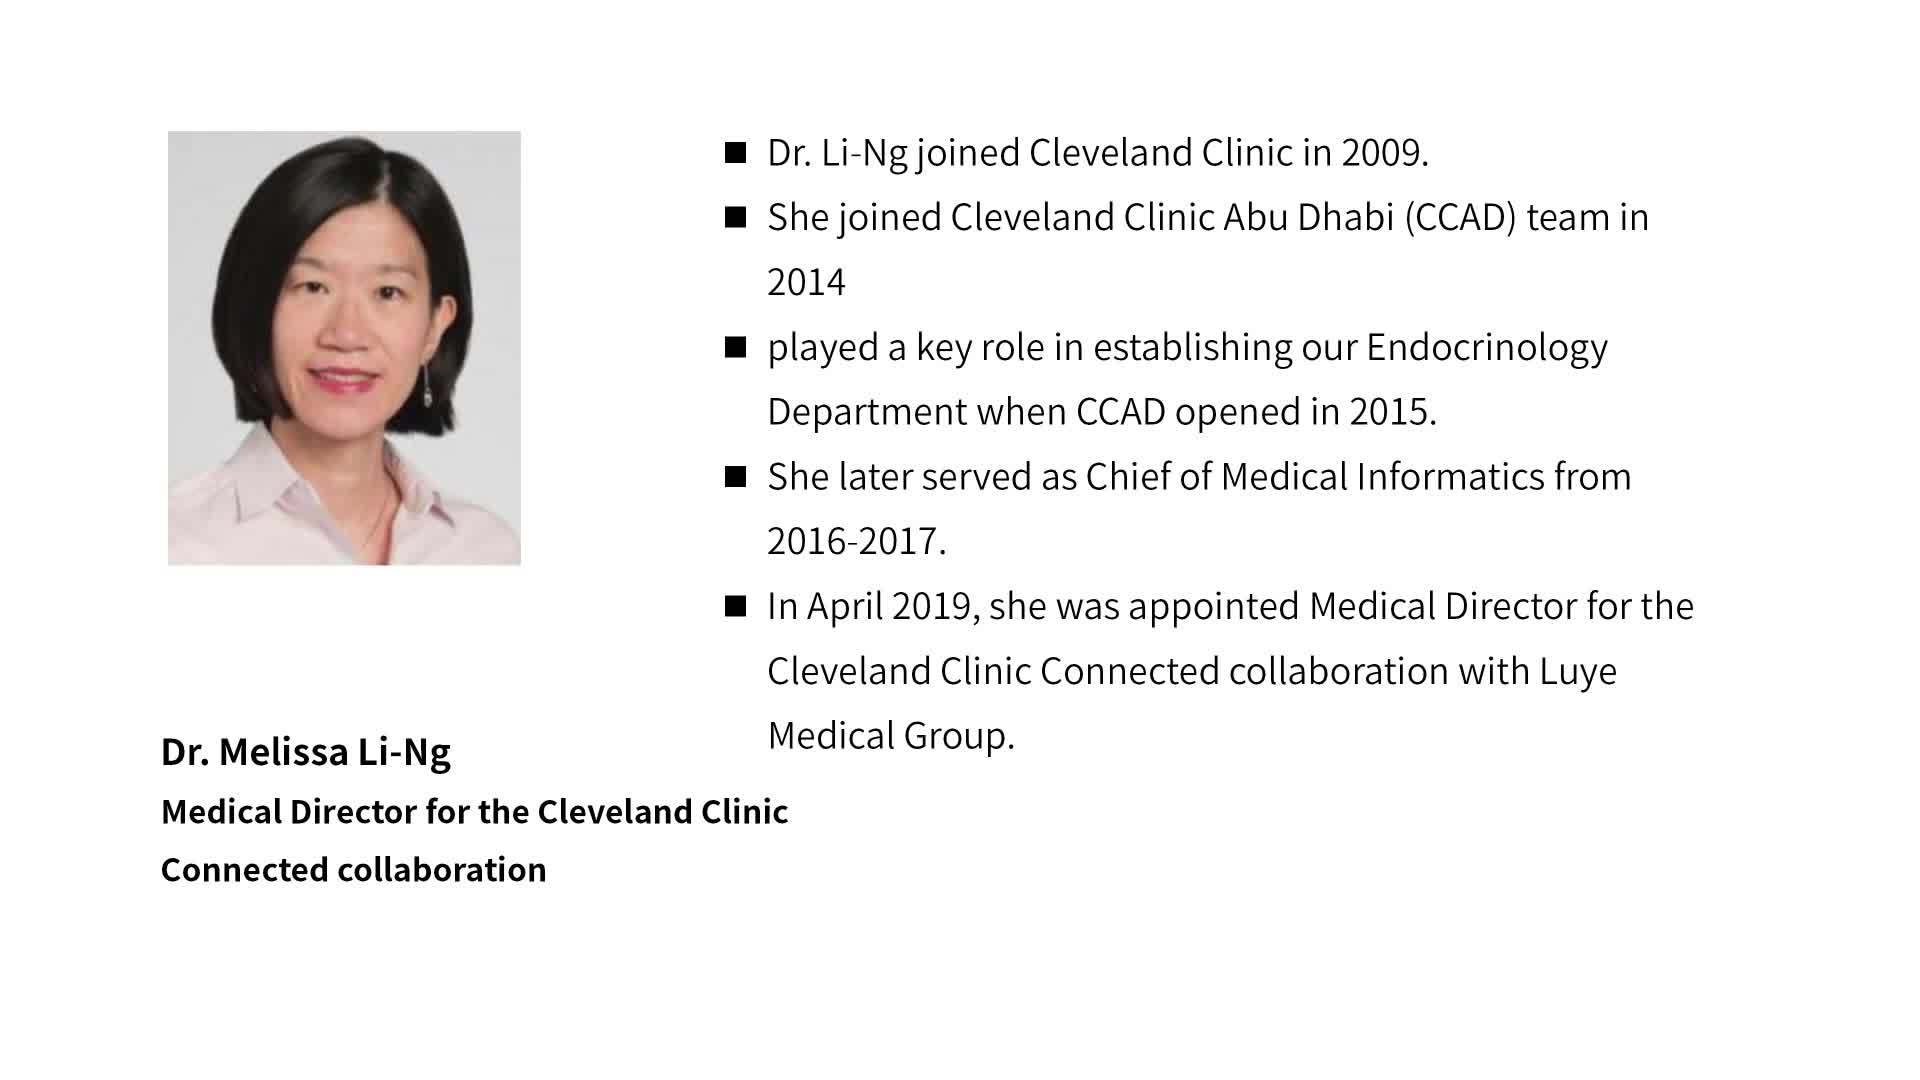 The Growth of Digital Health the COVID-19 Pandemic：The Cleveland Clinic Experien